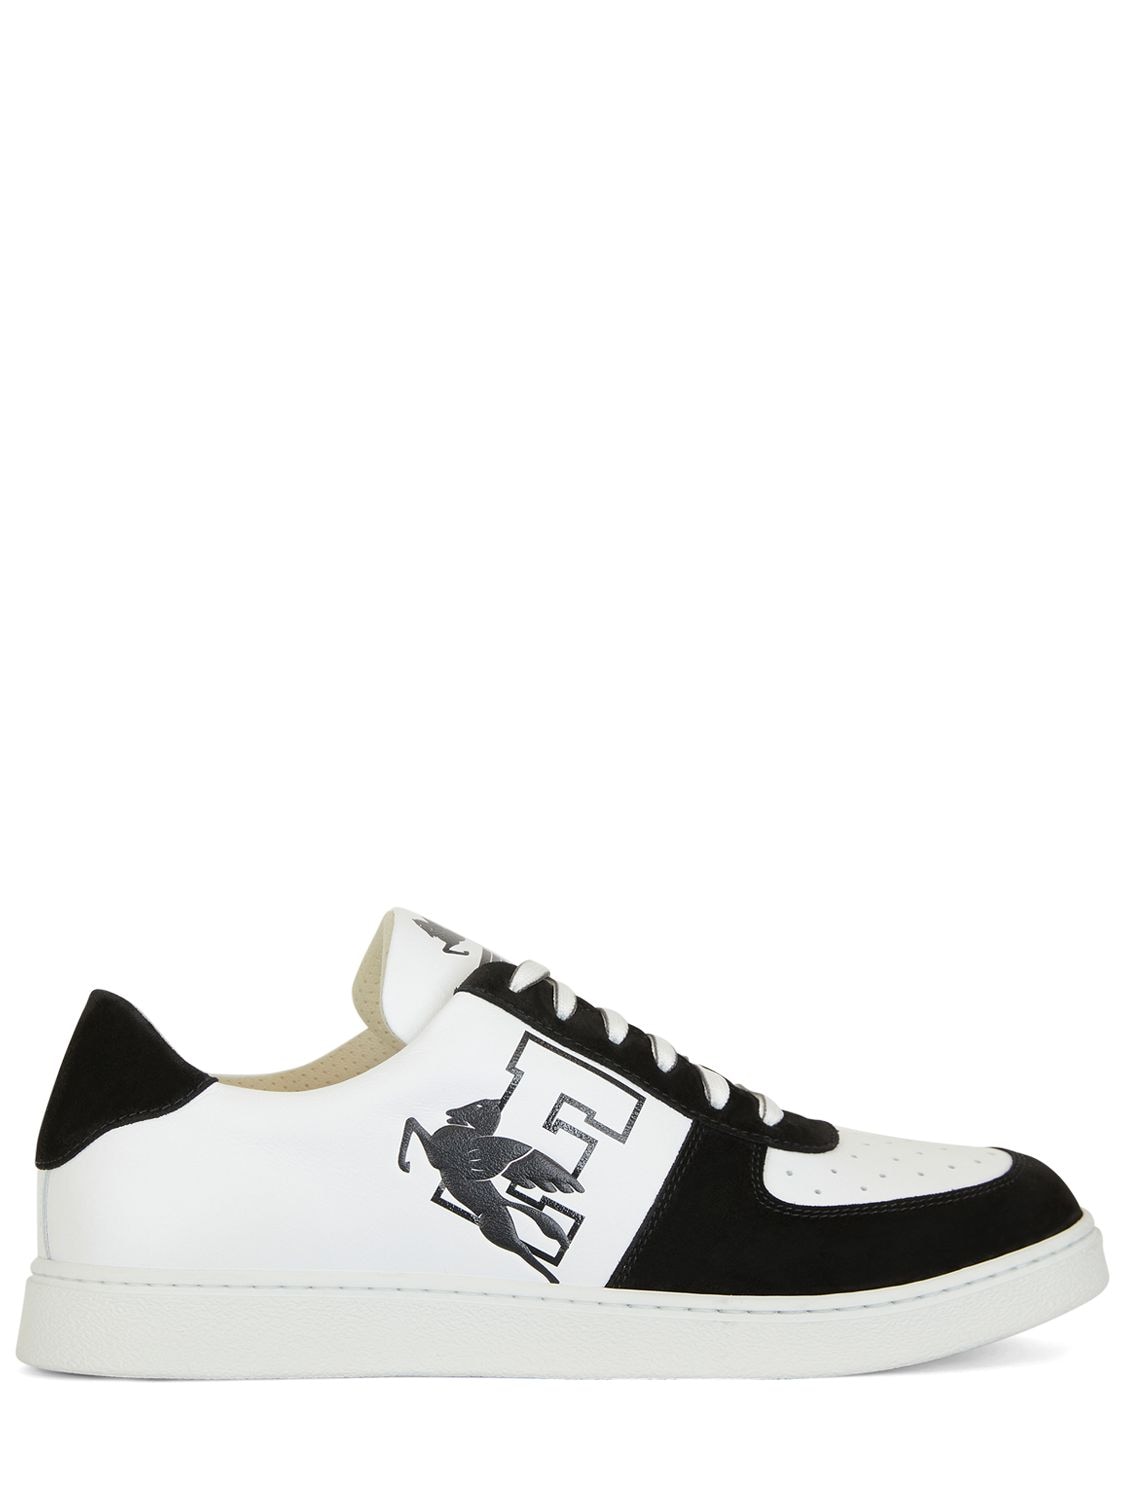 ETRO LOGO LEATHER LOW-TOP SNEAKERS